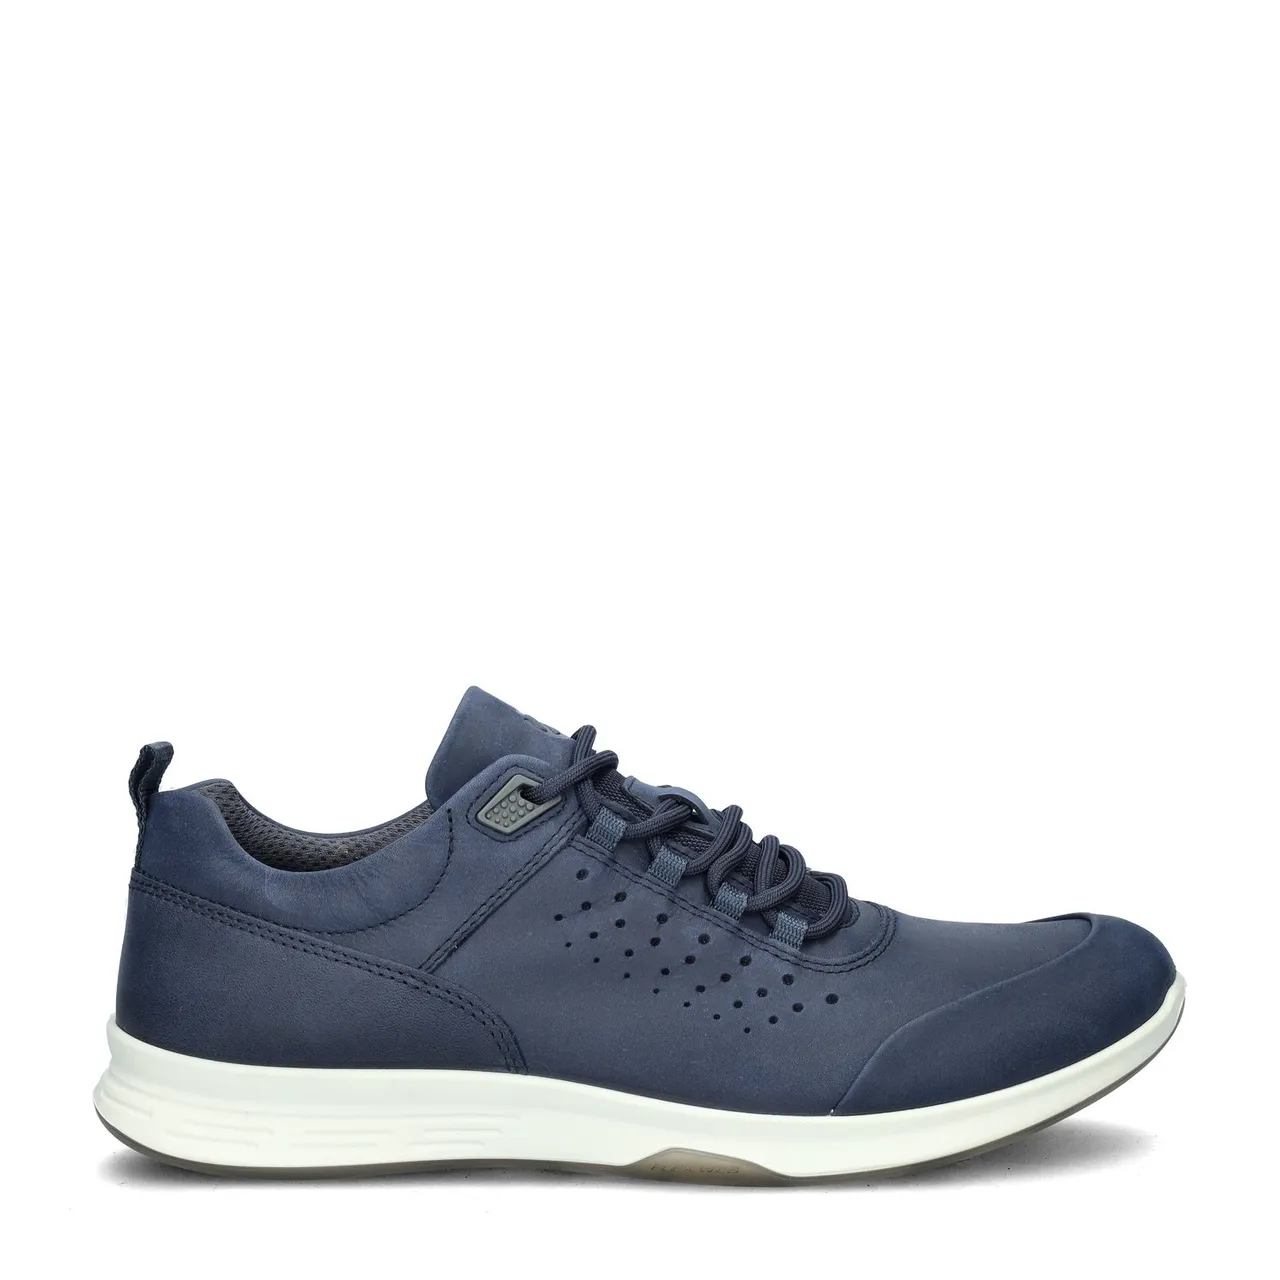 Ecco Exceed lage sneakers